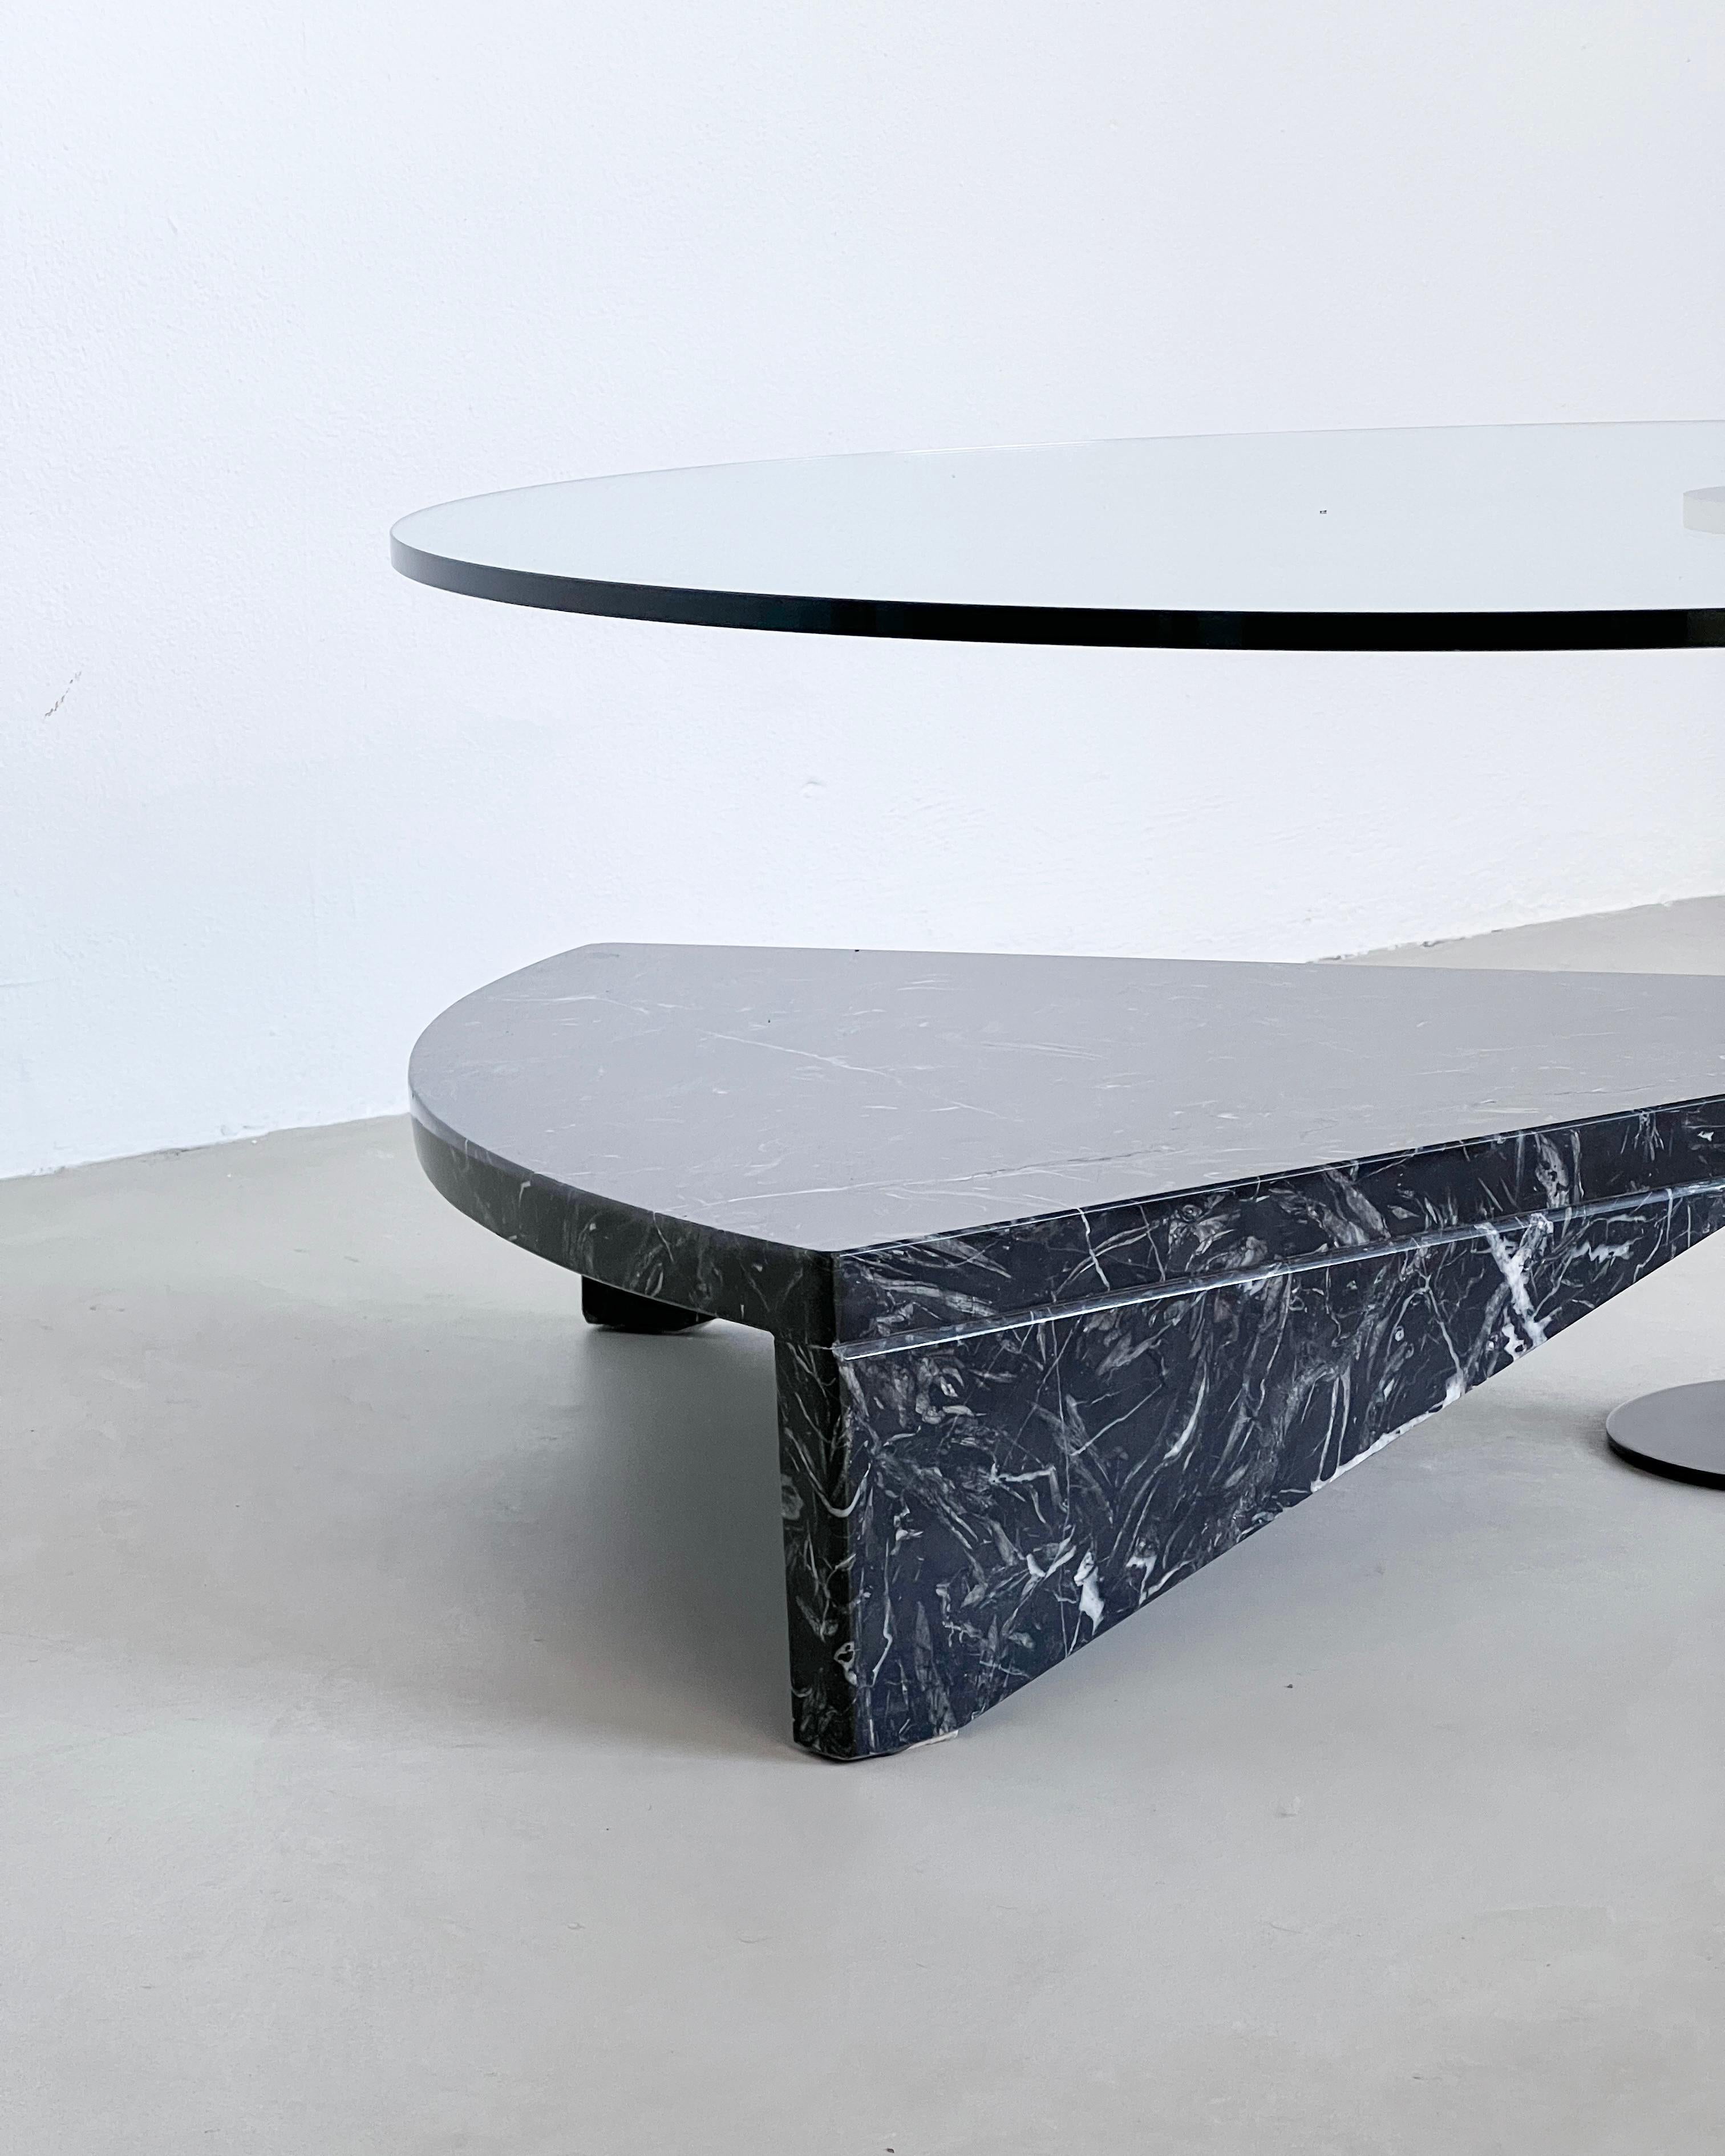 Sculptural Coffee Table in Marble and Glass, Italian Collectible Design 1